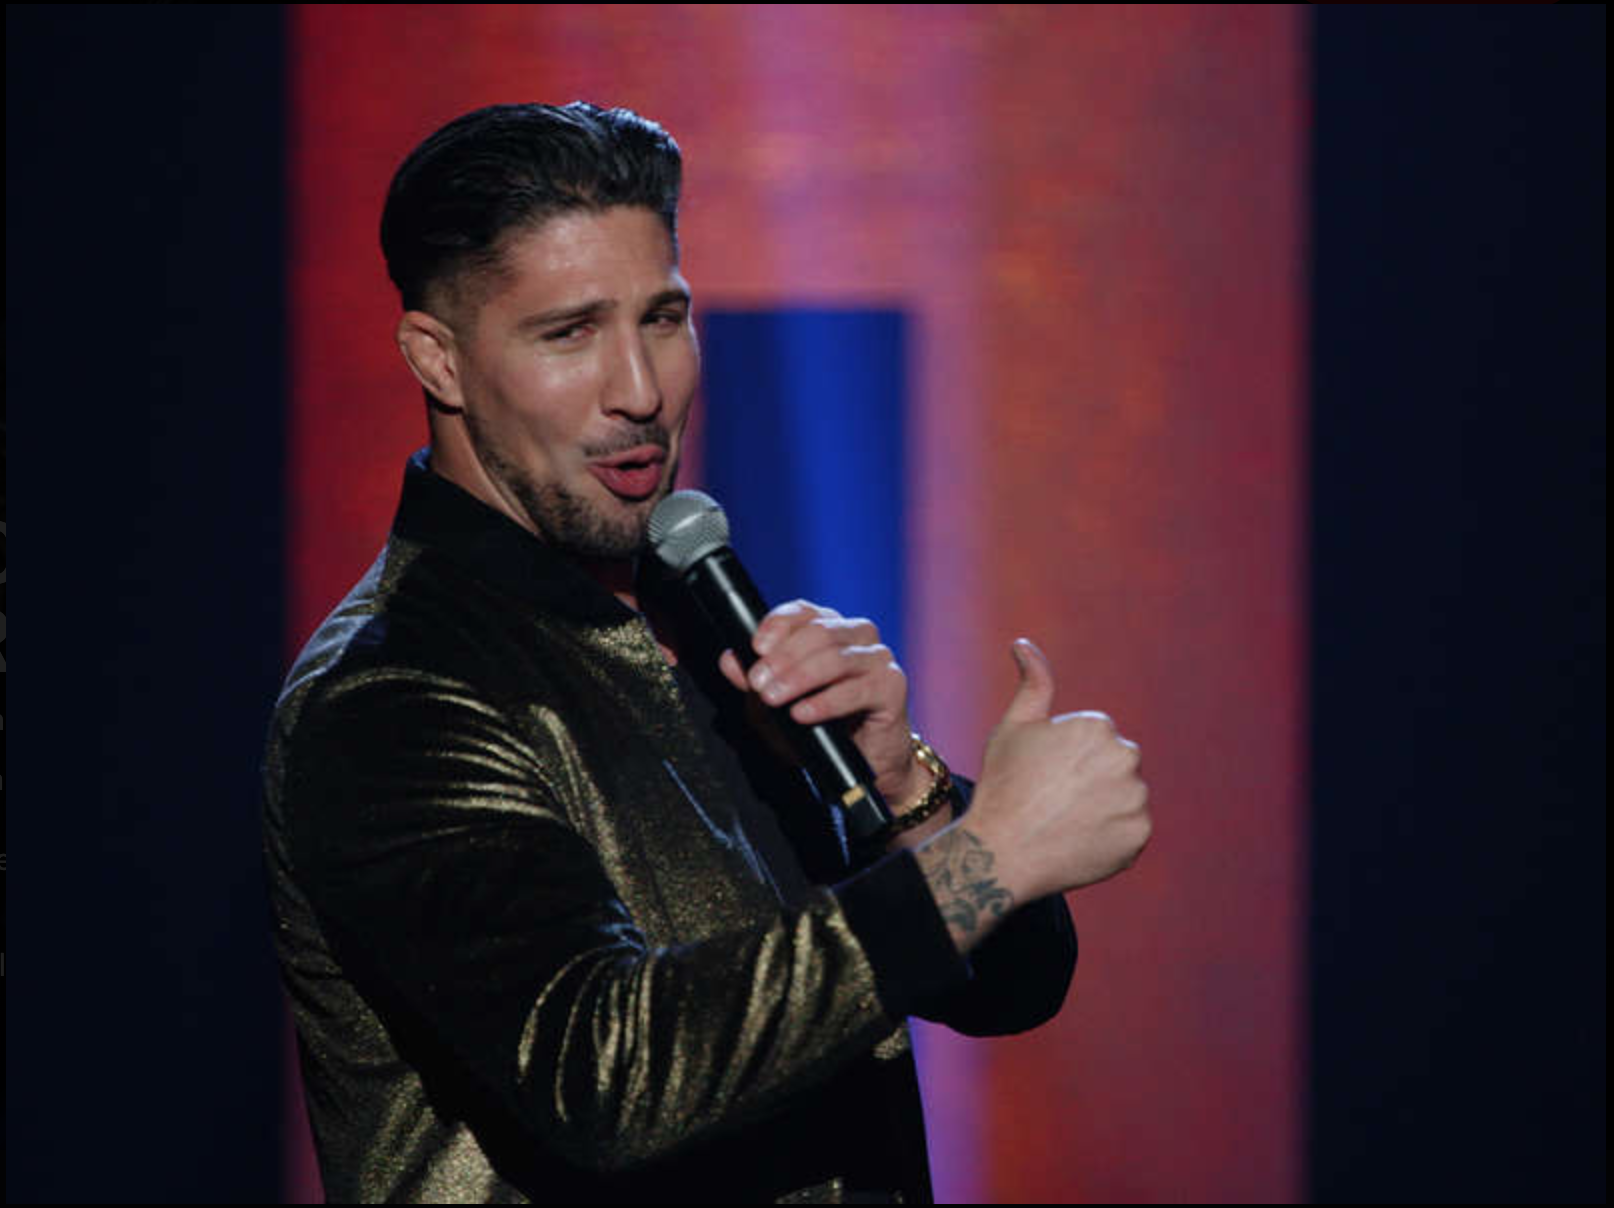 Review: Brendan Schaub, “You’d Be Surprised” on Showtime